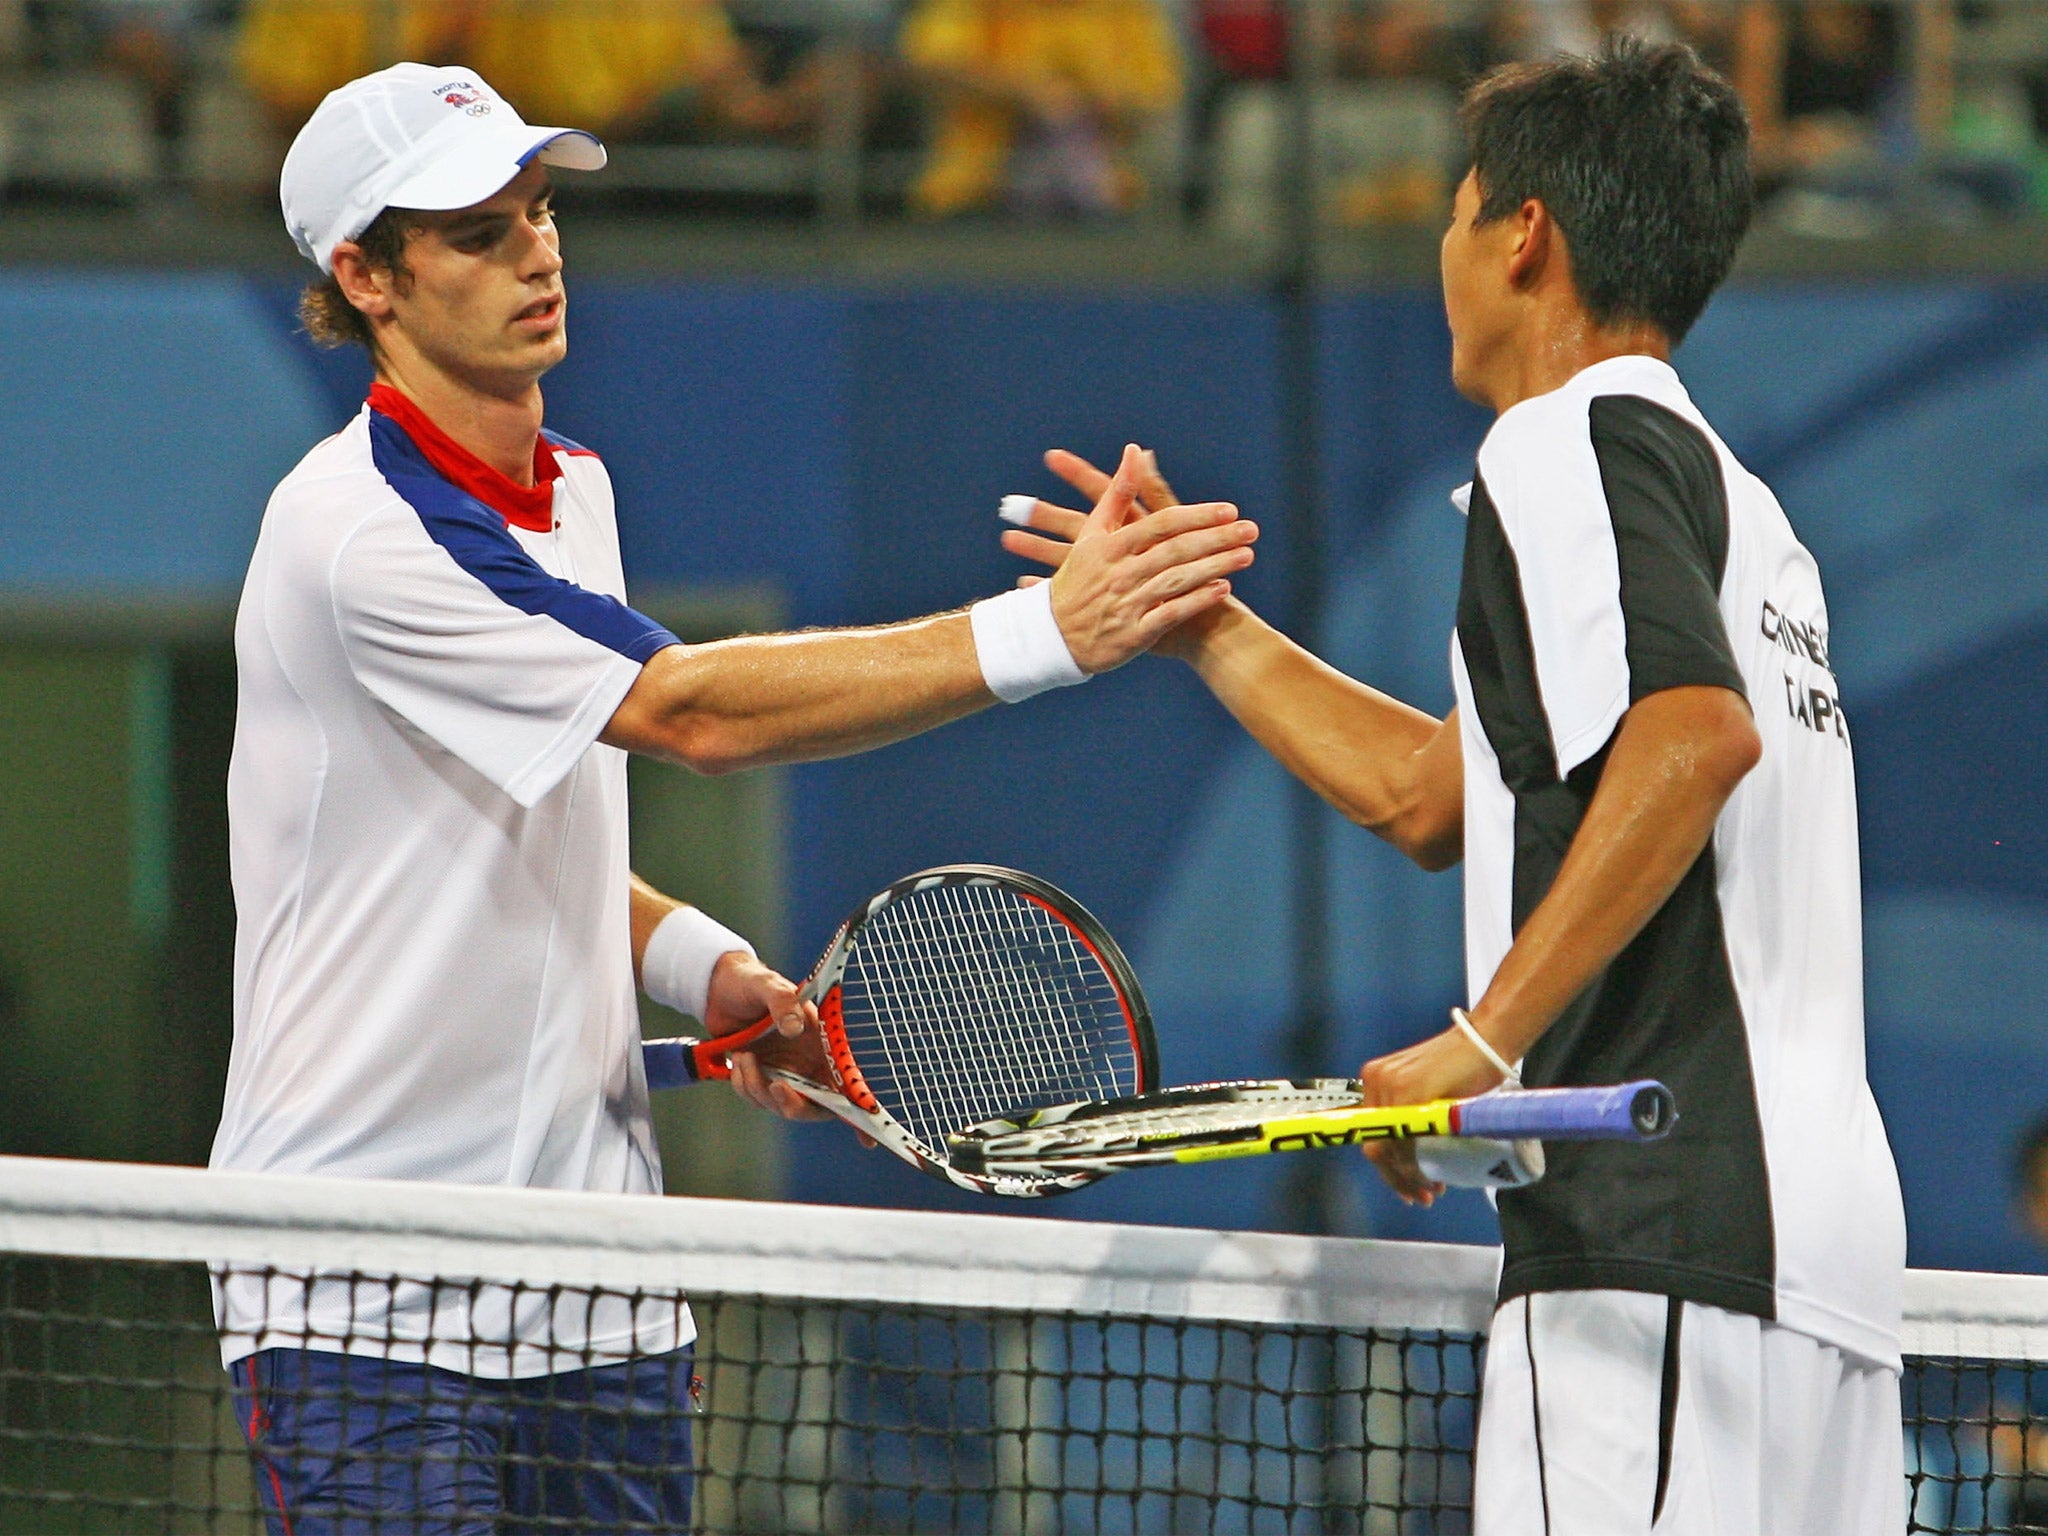 Andy Murray loses to Lu Yen-hsun at the Beijing Olympics in 2008